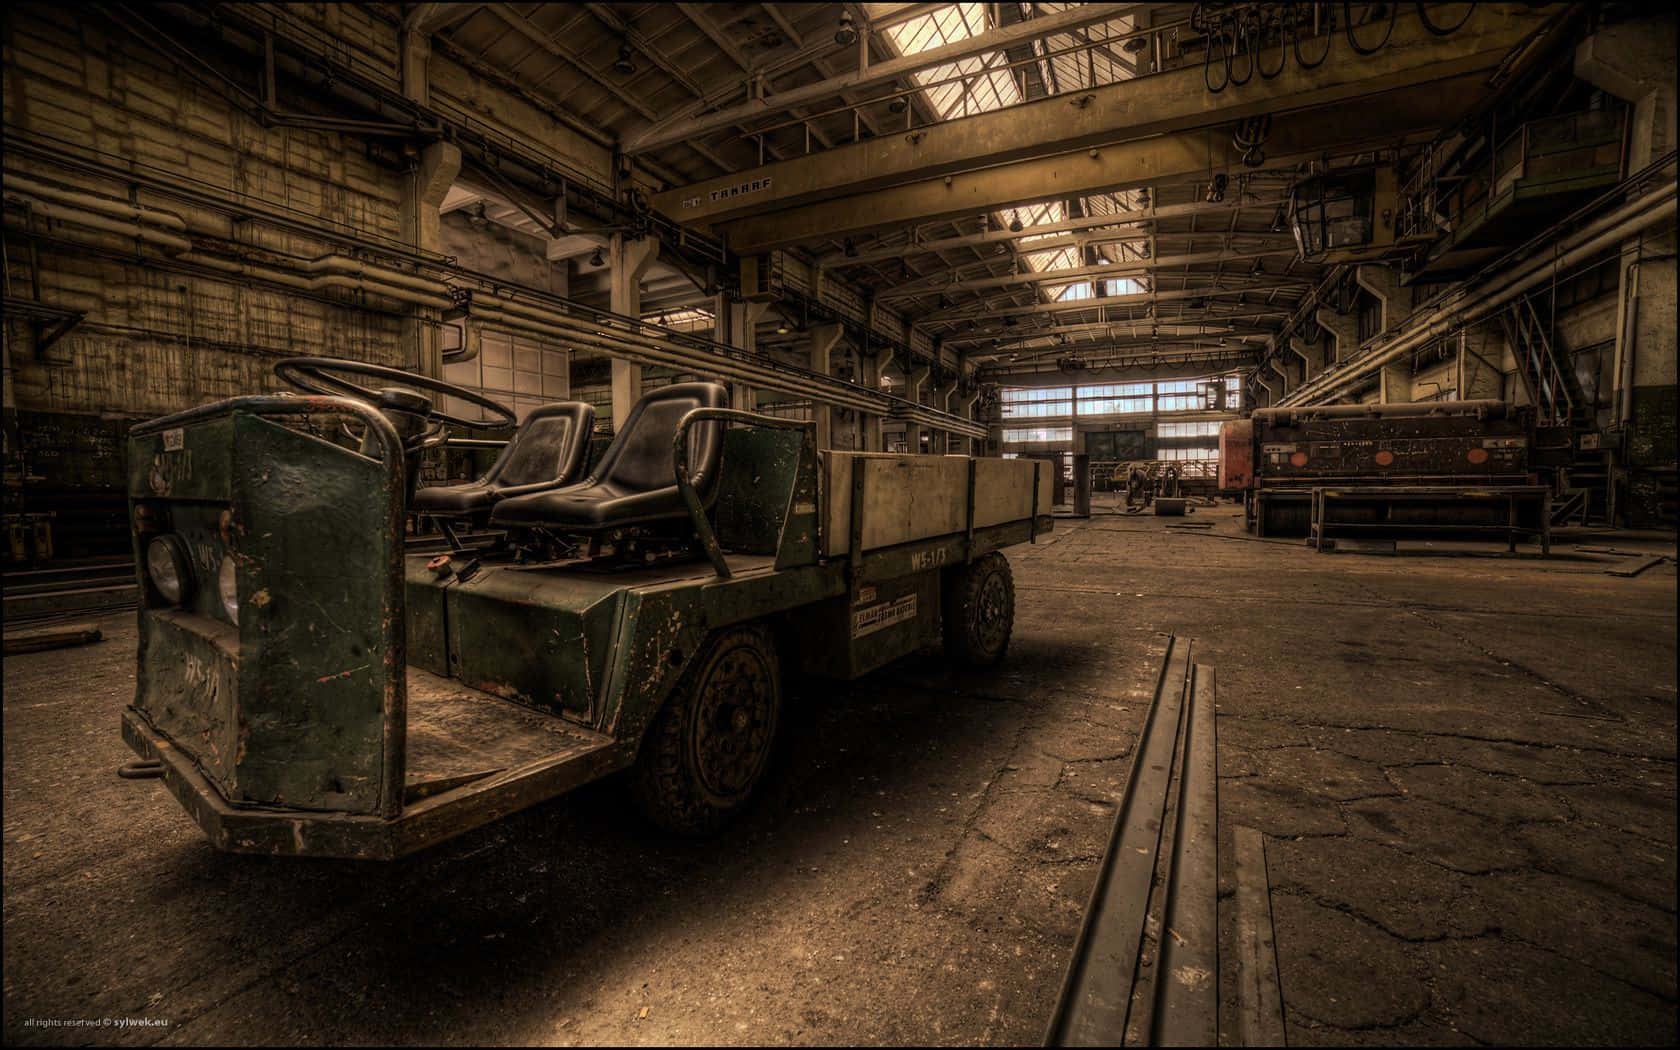 A Green Truck In A Warehouse